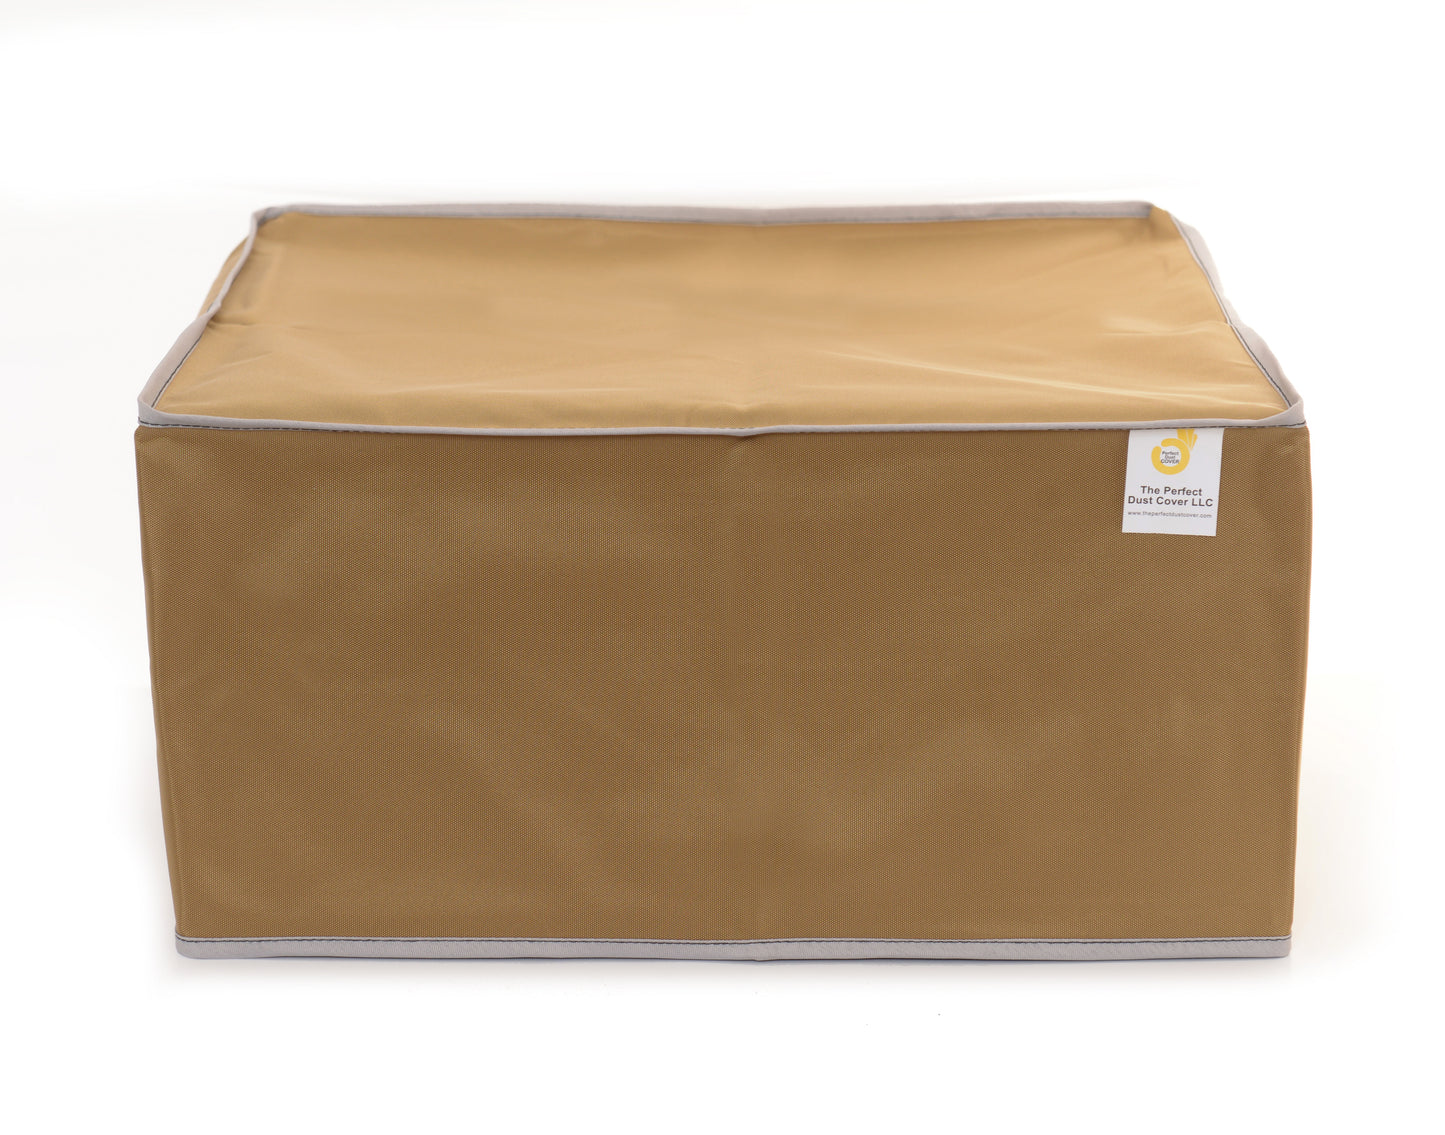 The Perfect Dust Cover, Tan Nylon Cover Compatible with Graphtec FC-9600-160 64'' Cutting Plotter, Anti Static, Double Stitched and Waterproof Dust Cover, Dimensions 84''W x 28''D x 48''H by The Perfect Dust Cover LLC